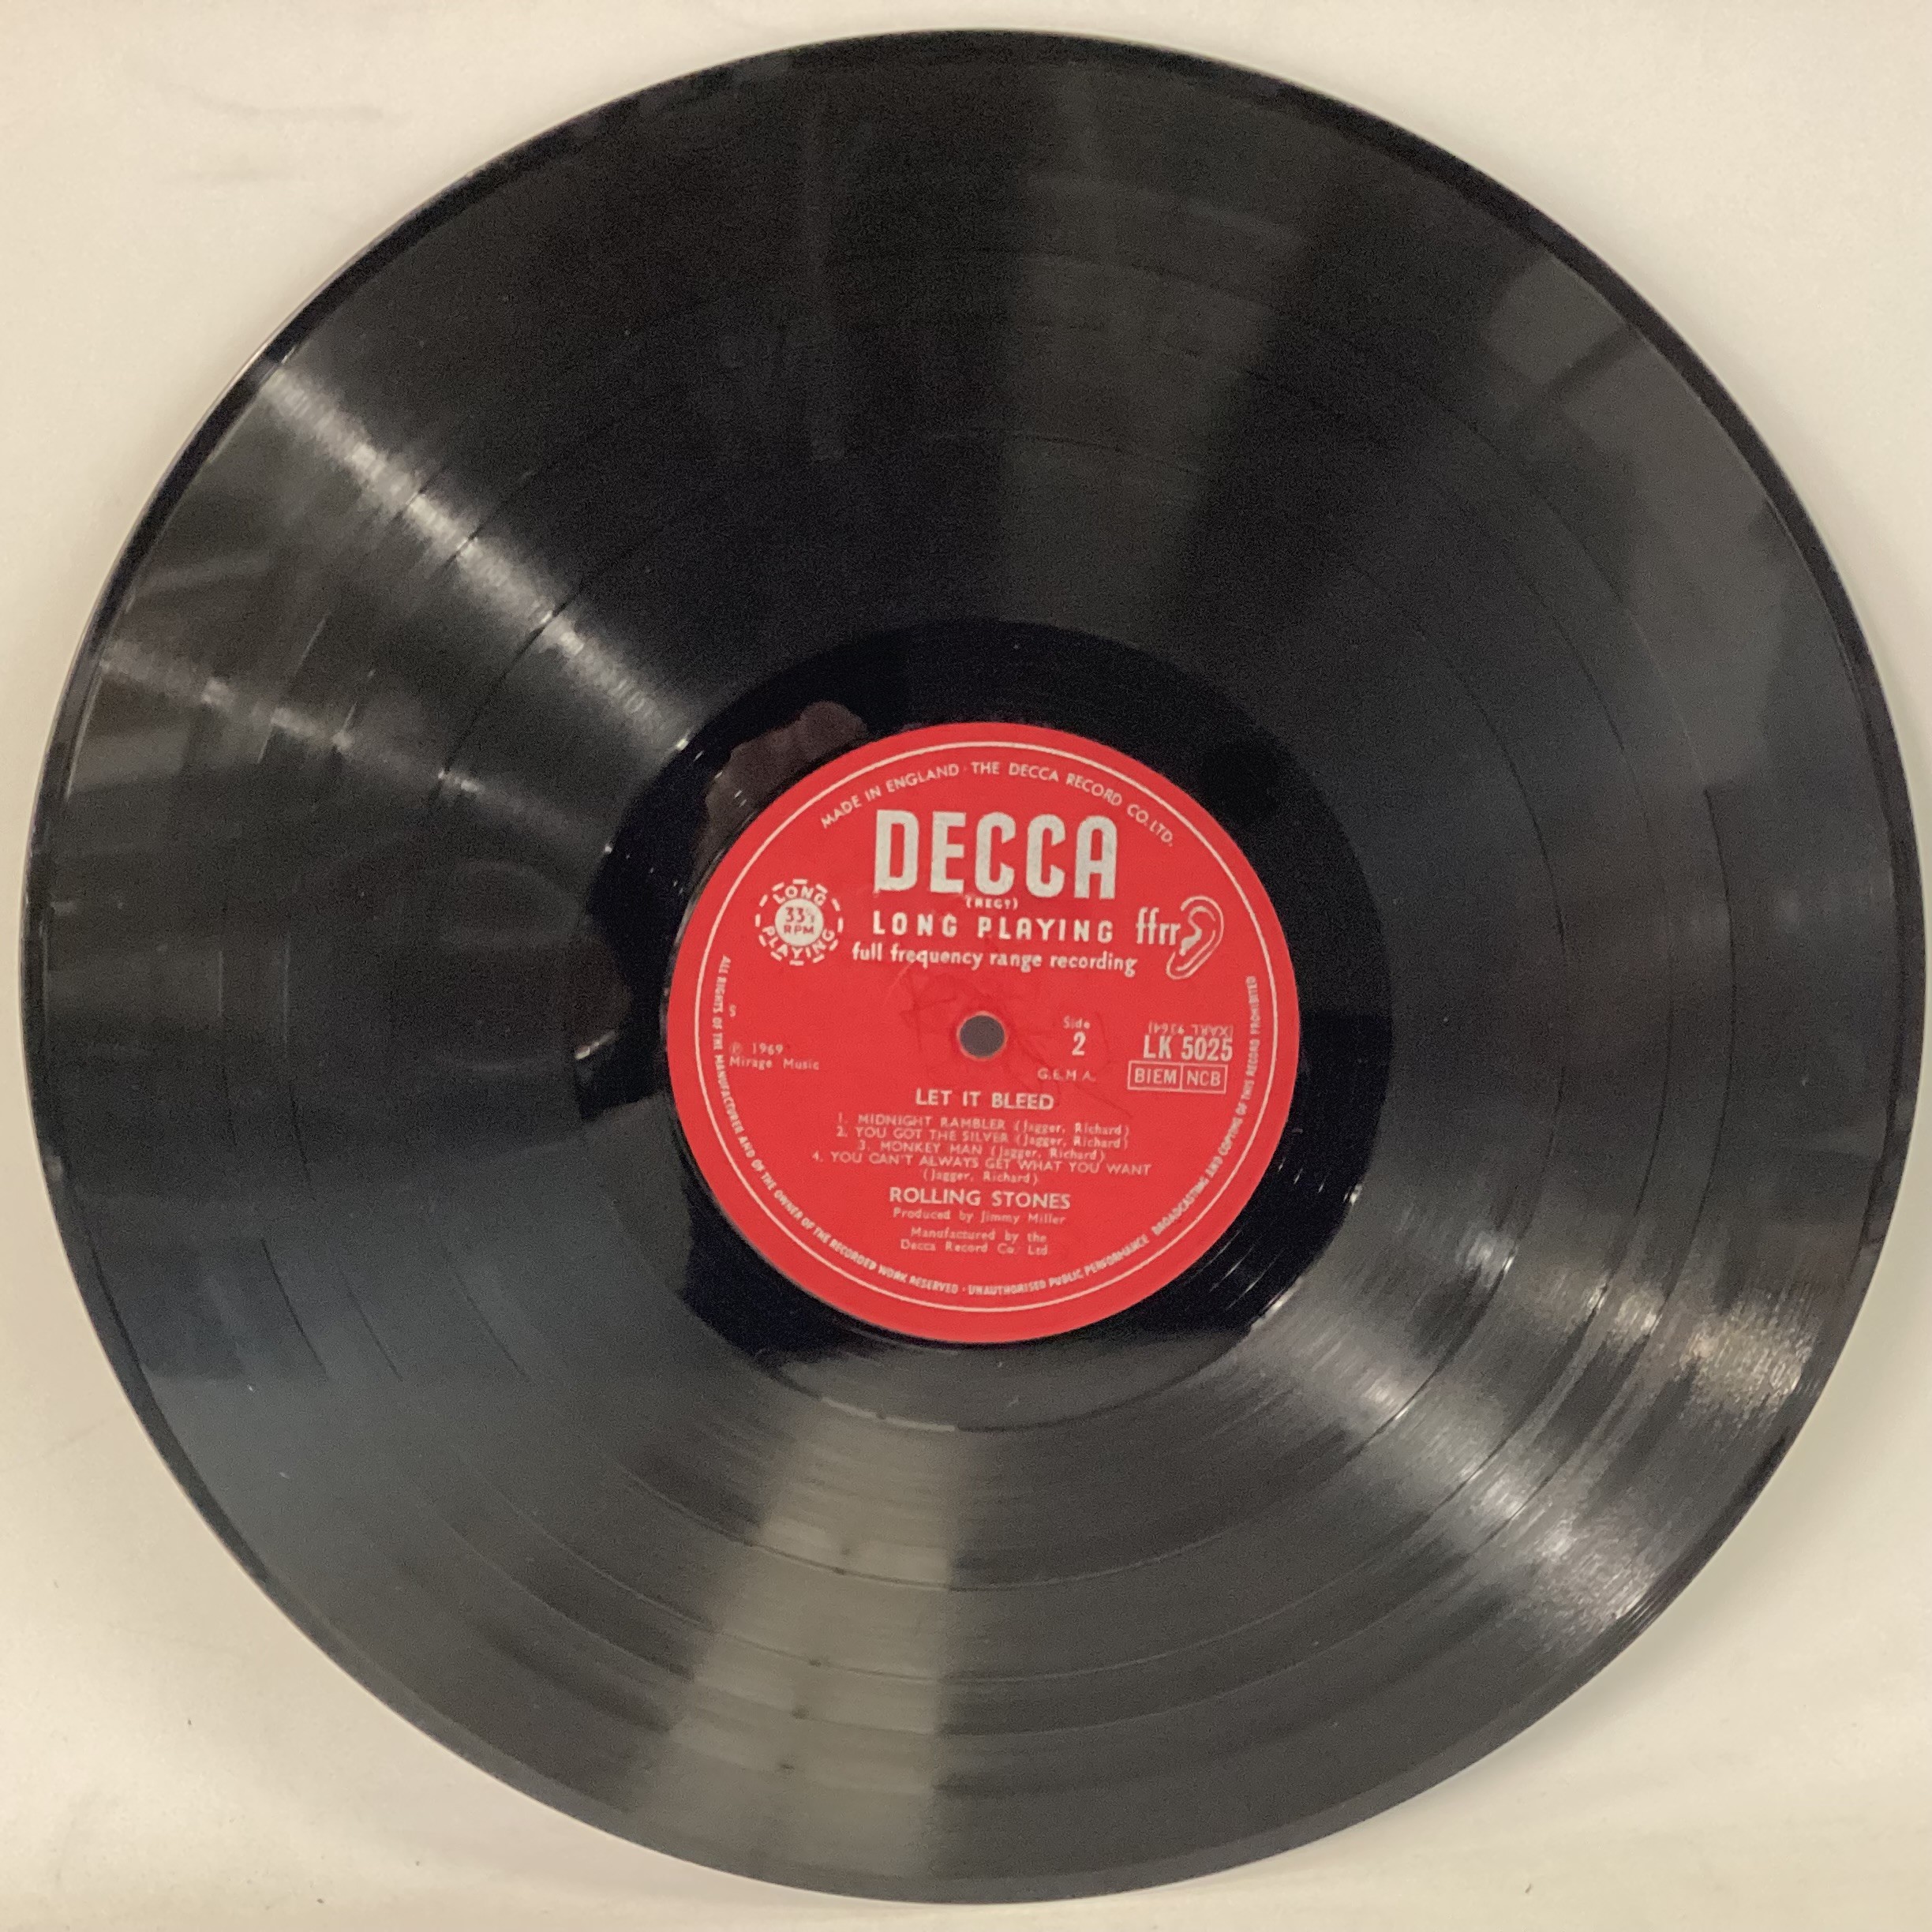 ROLLING STONES ‘LET IT BLEED’ UNBOXED DECCA LP. Great album found here with unboxed Decca label logo - Image 5 of 5